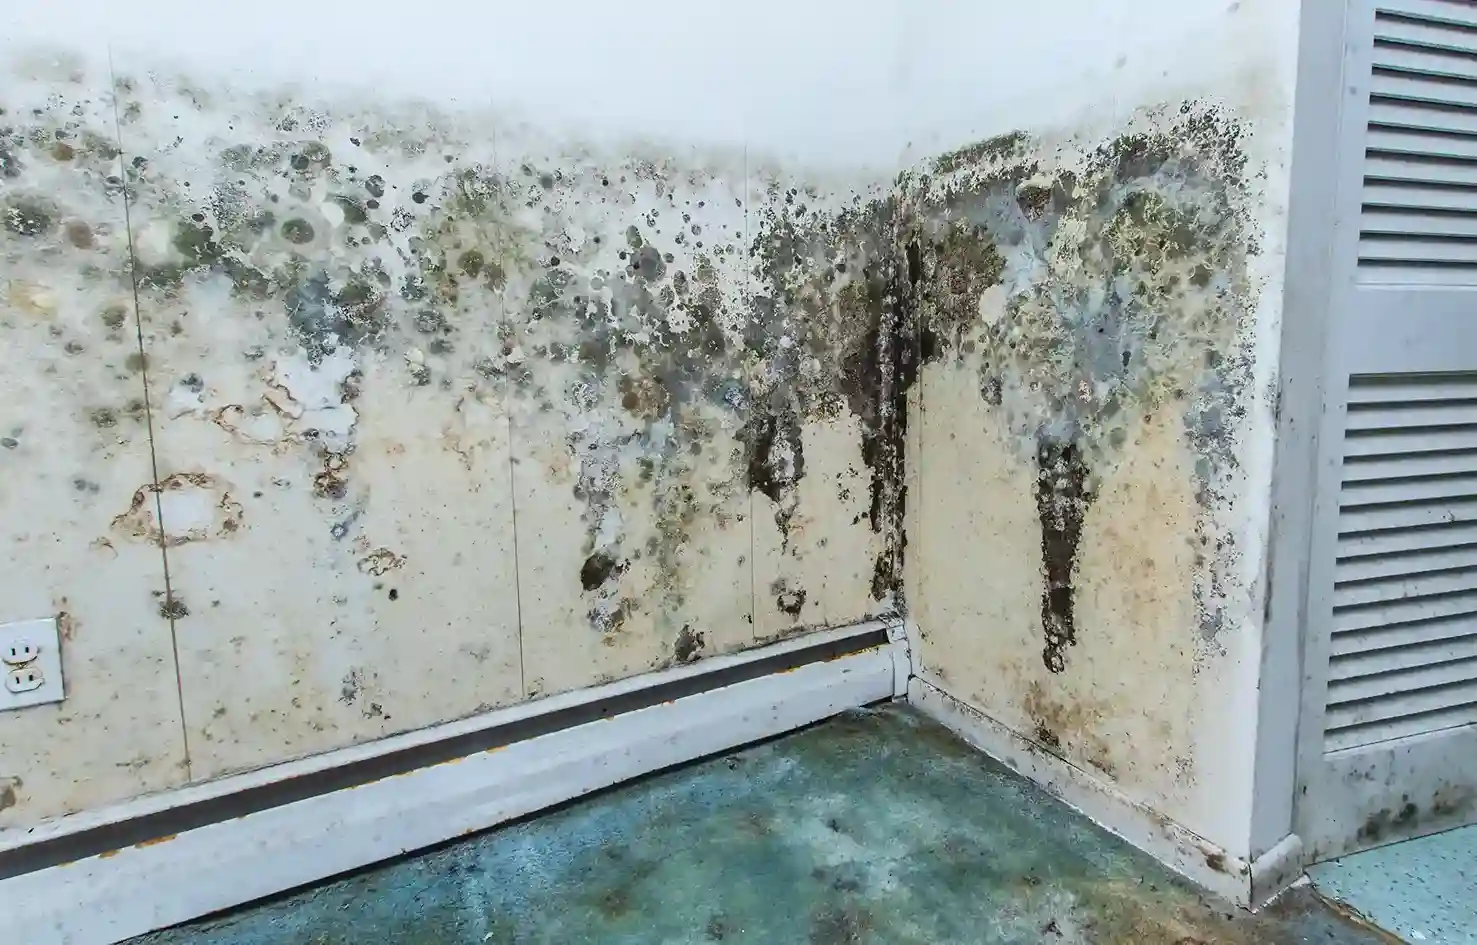 Preventing Mold Growth After Water Damage